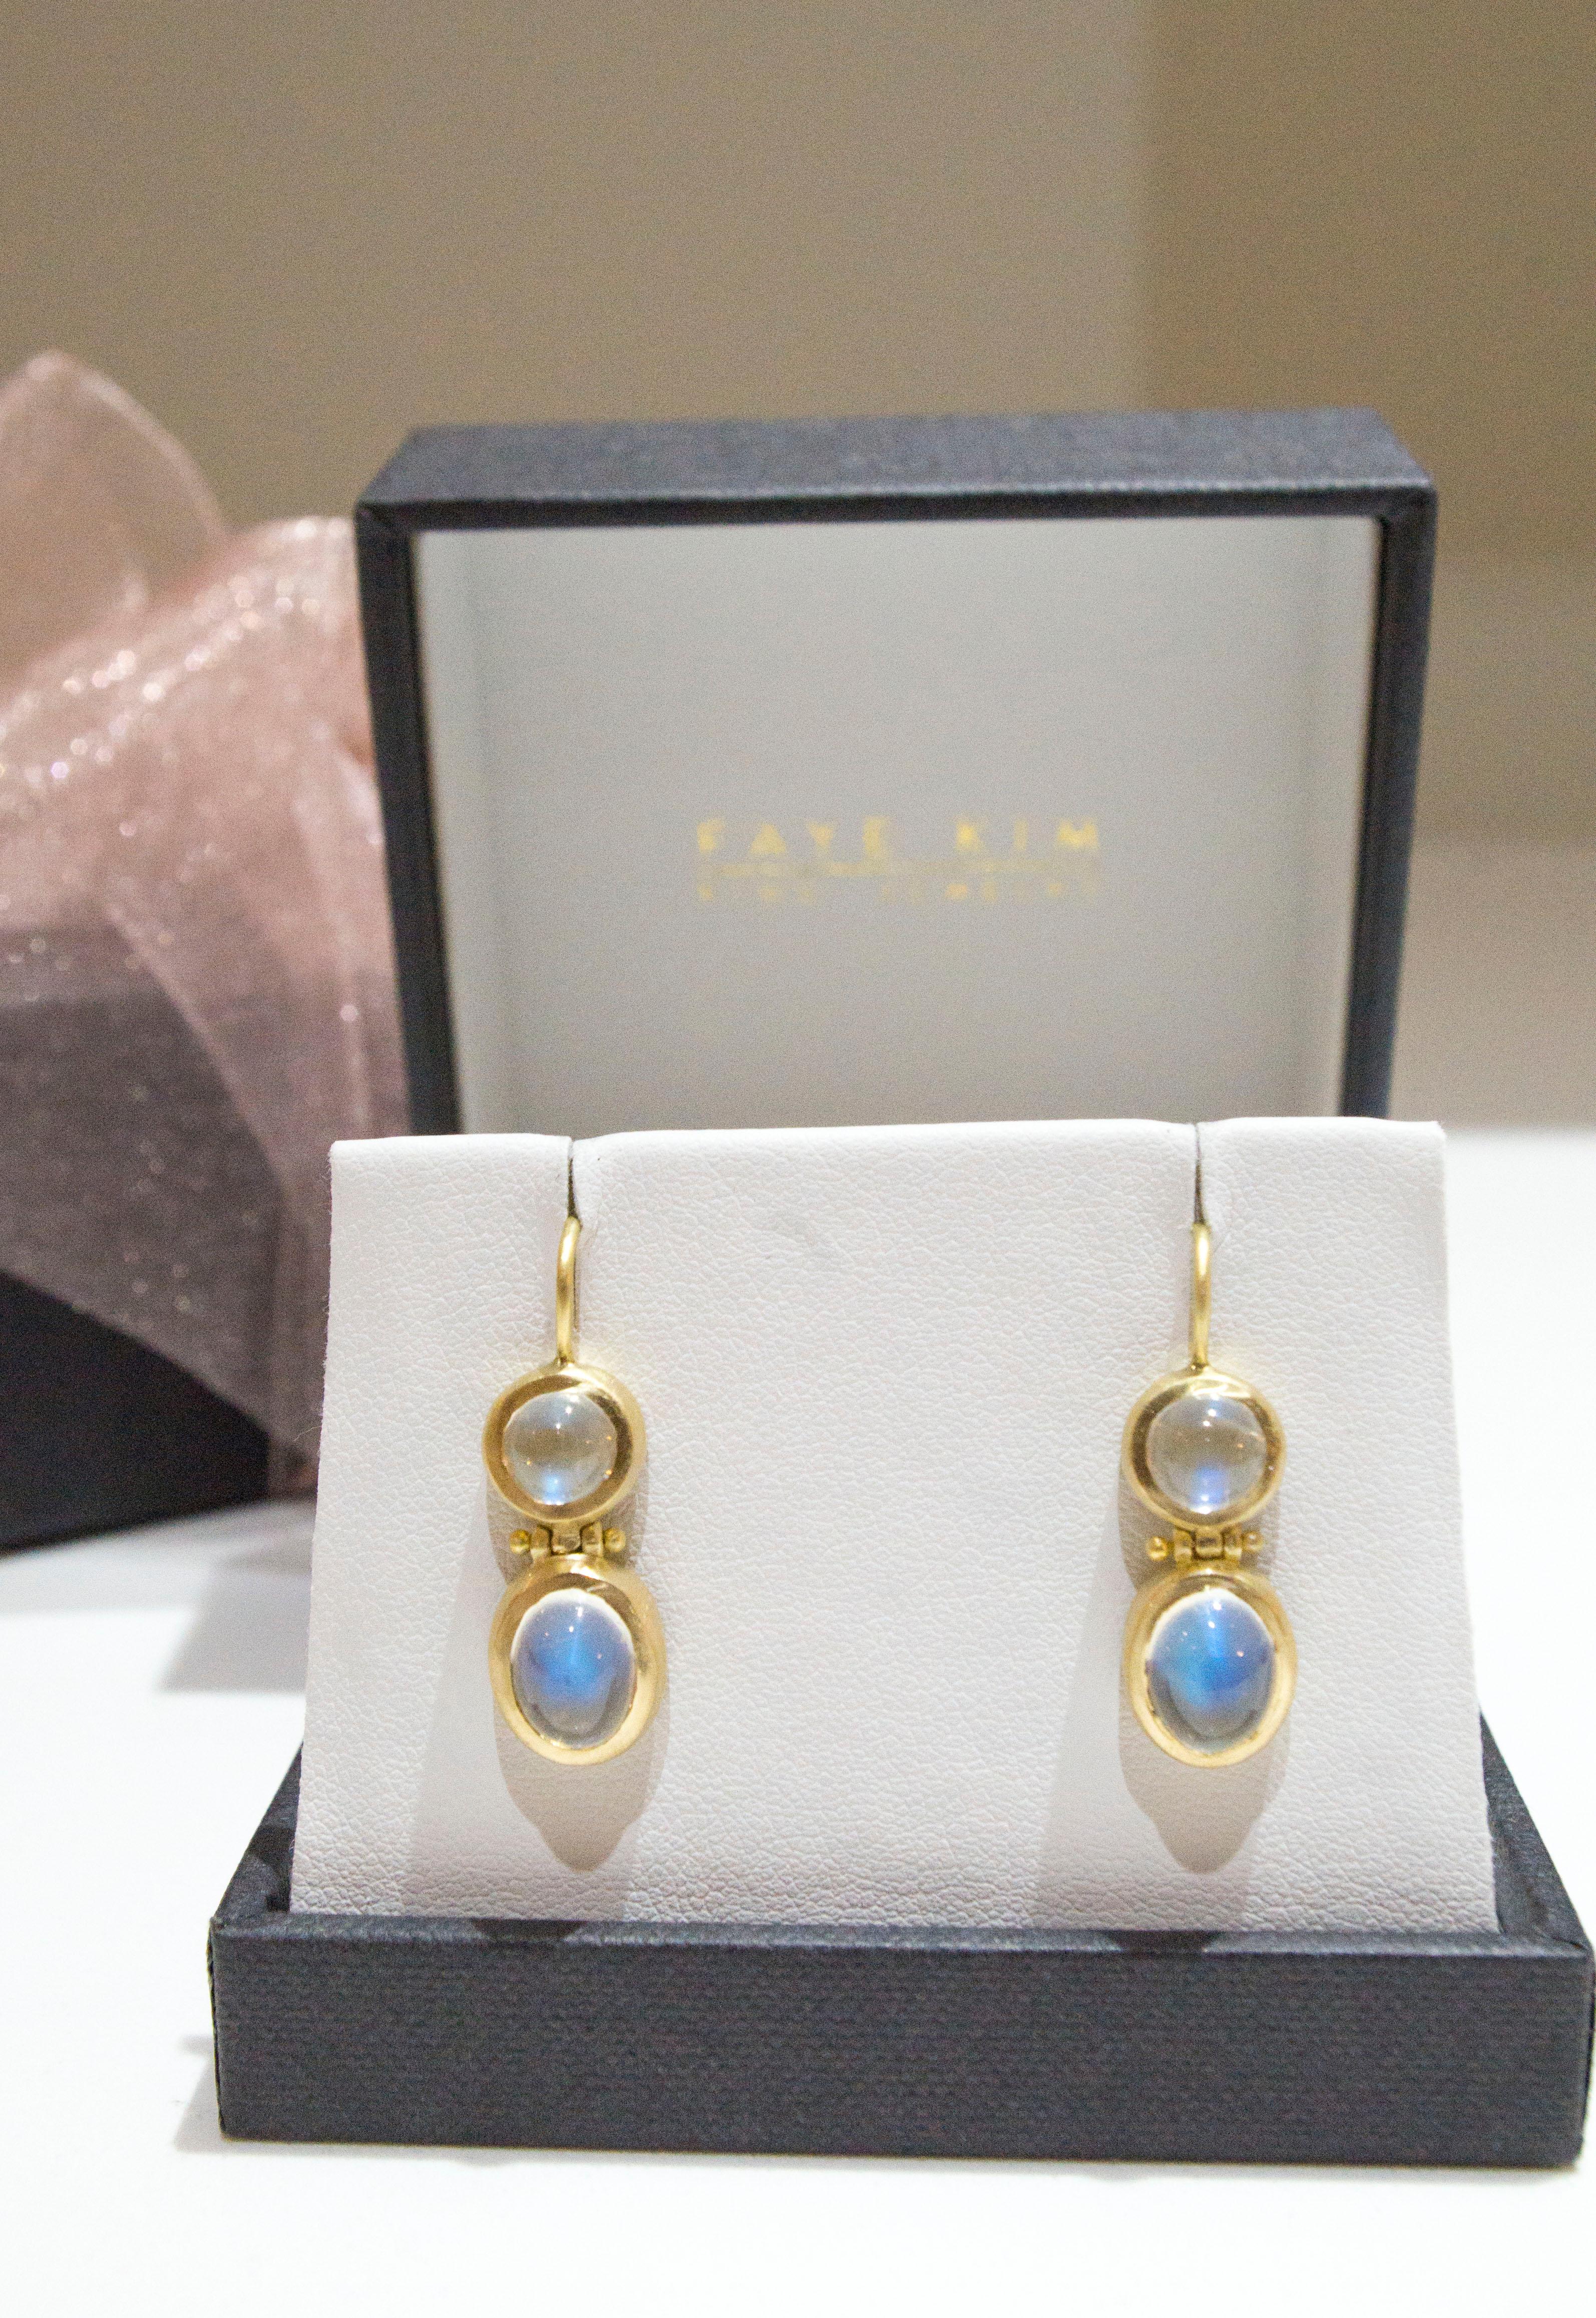 Faye Kim 18K Gold Double Ceylon Moonstone Hinged Earrings 

These bold and beautiful 18k Gold double Ceylon Moonstone Bezel Earrings make quite a statement. The matte gold enhances the moonstones striking rainbow effect. Featuring matched